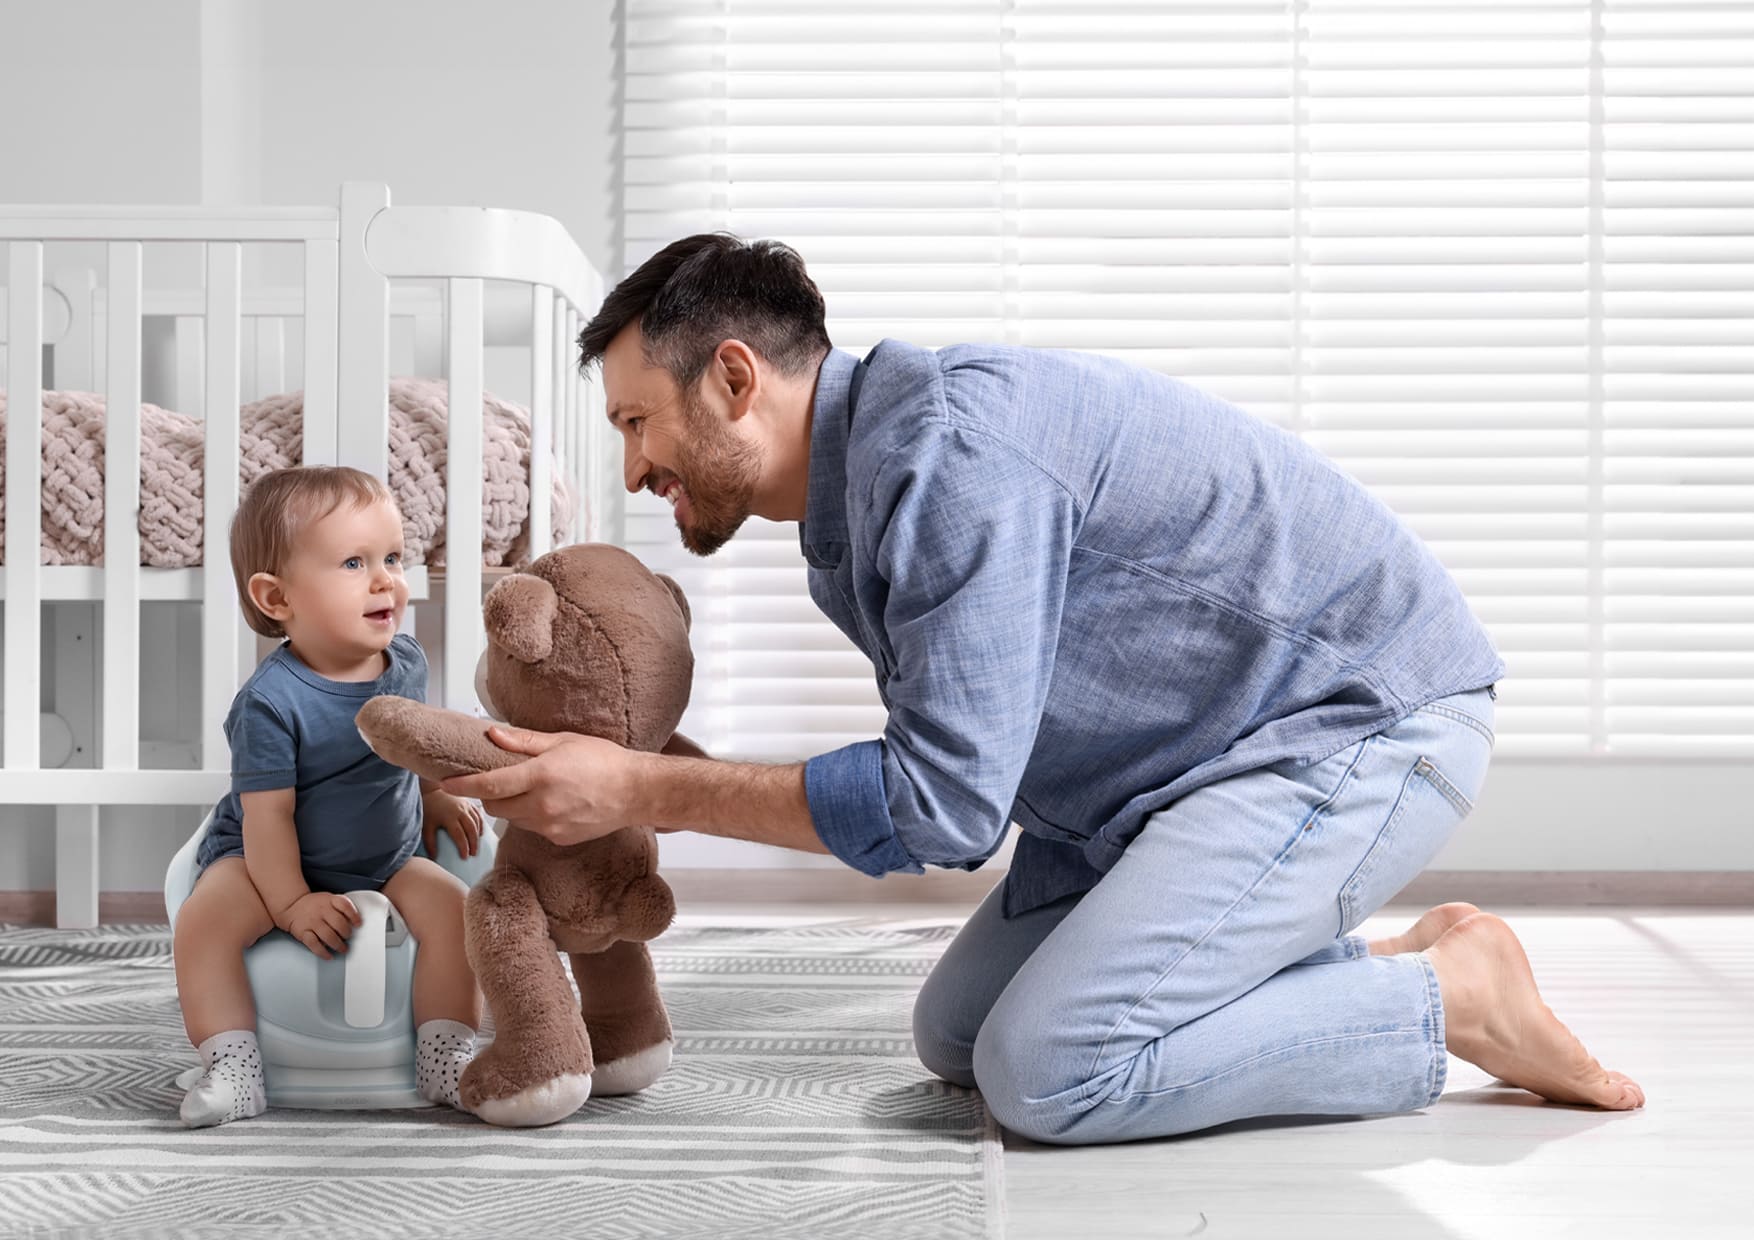 Baby on potty playing with teddy bear with daddy